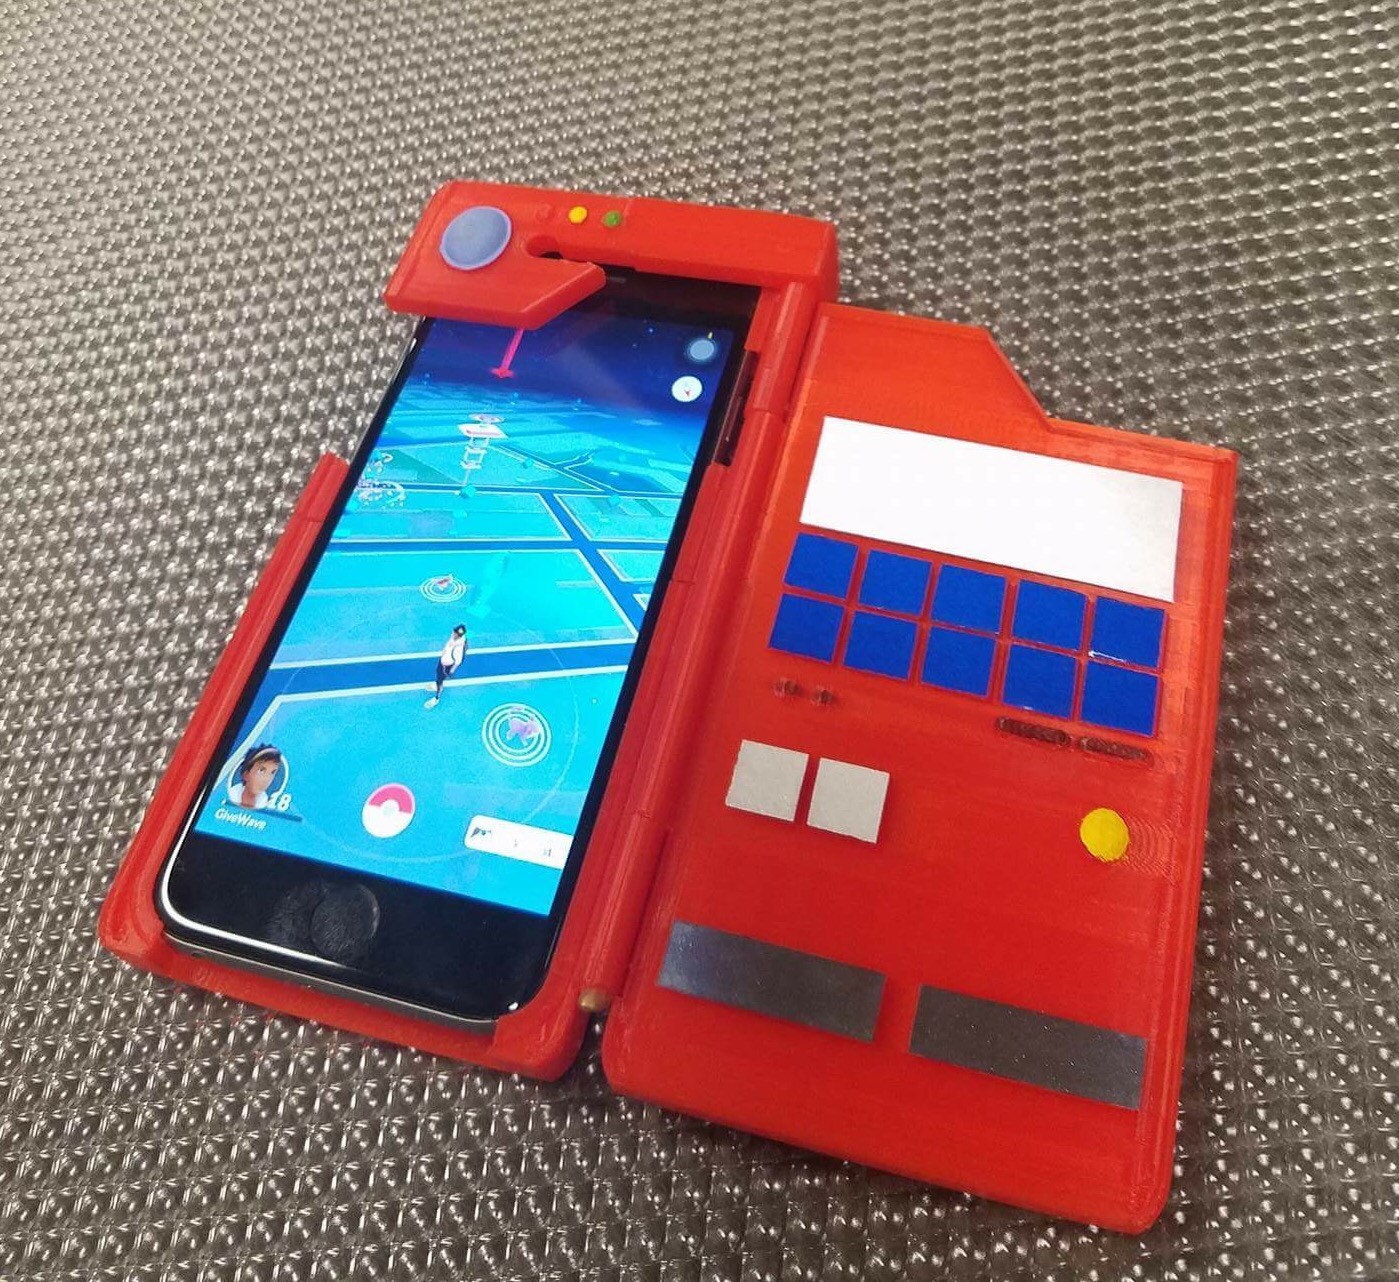 3D-printed Pokédex for playing 'Pokémon Go' has built-in battery